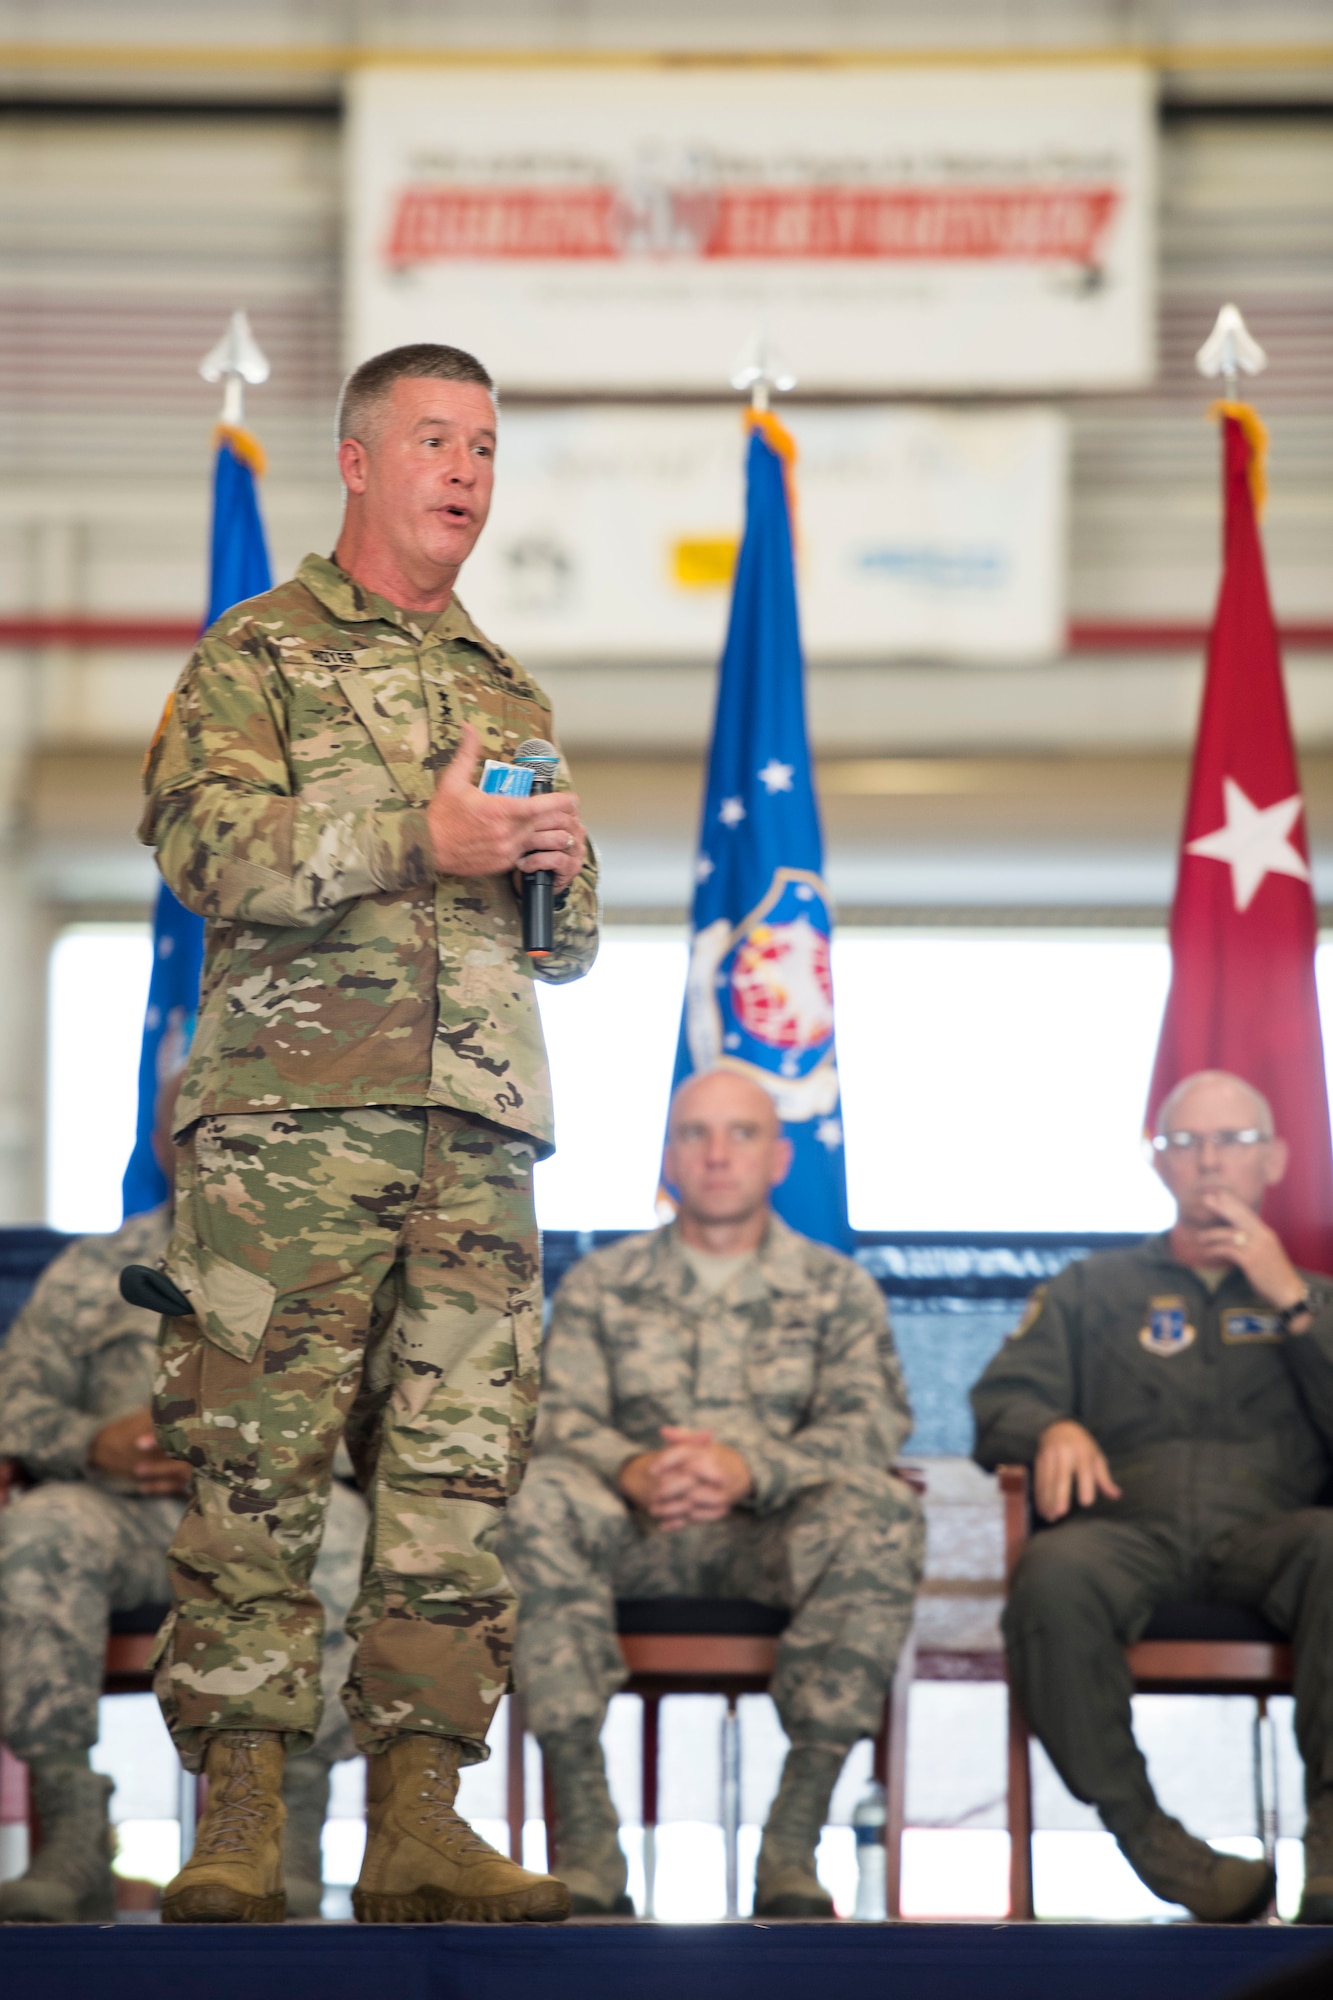 West Virginia National Guard Adjutant General, Maj. Gen. James Hoyer, speaks during a change of command ceremony at the 167th Airlift Wing, Aug. 5. Col. David Cochran assumed command of the wing from Col. Shaun Perkowski. (U.S. Air National Guard photo by Senior Master Sgt. Emily Beightol-Deyerle)